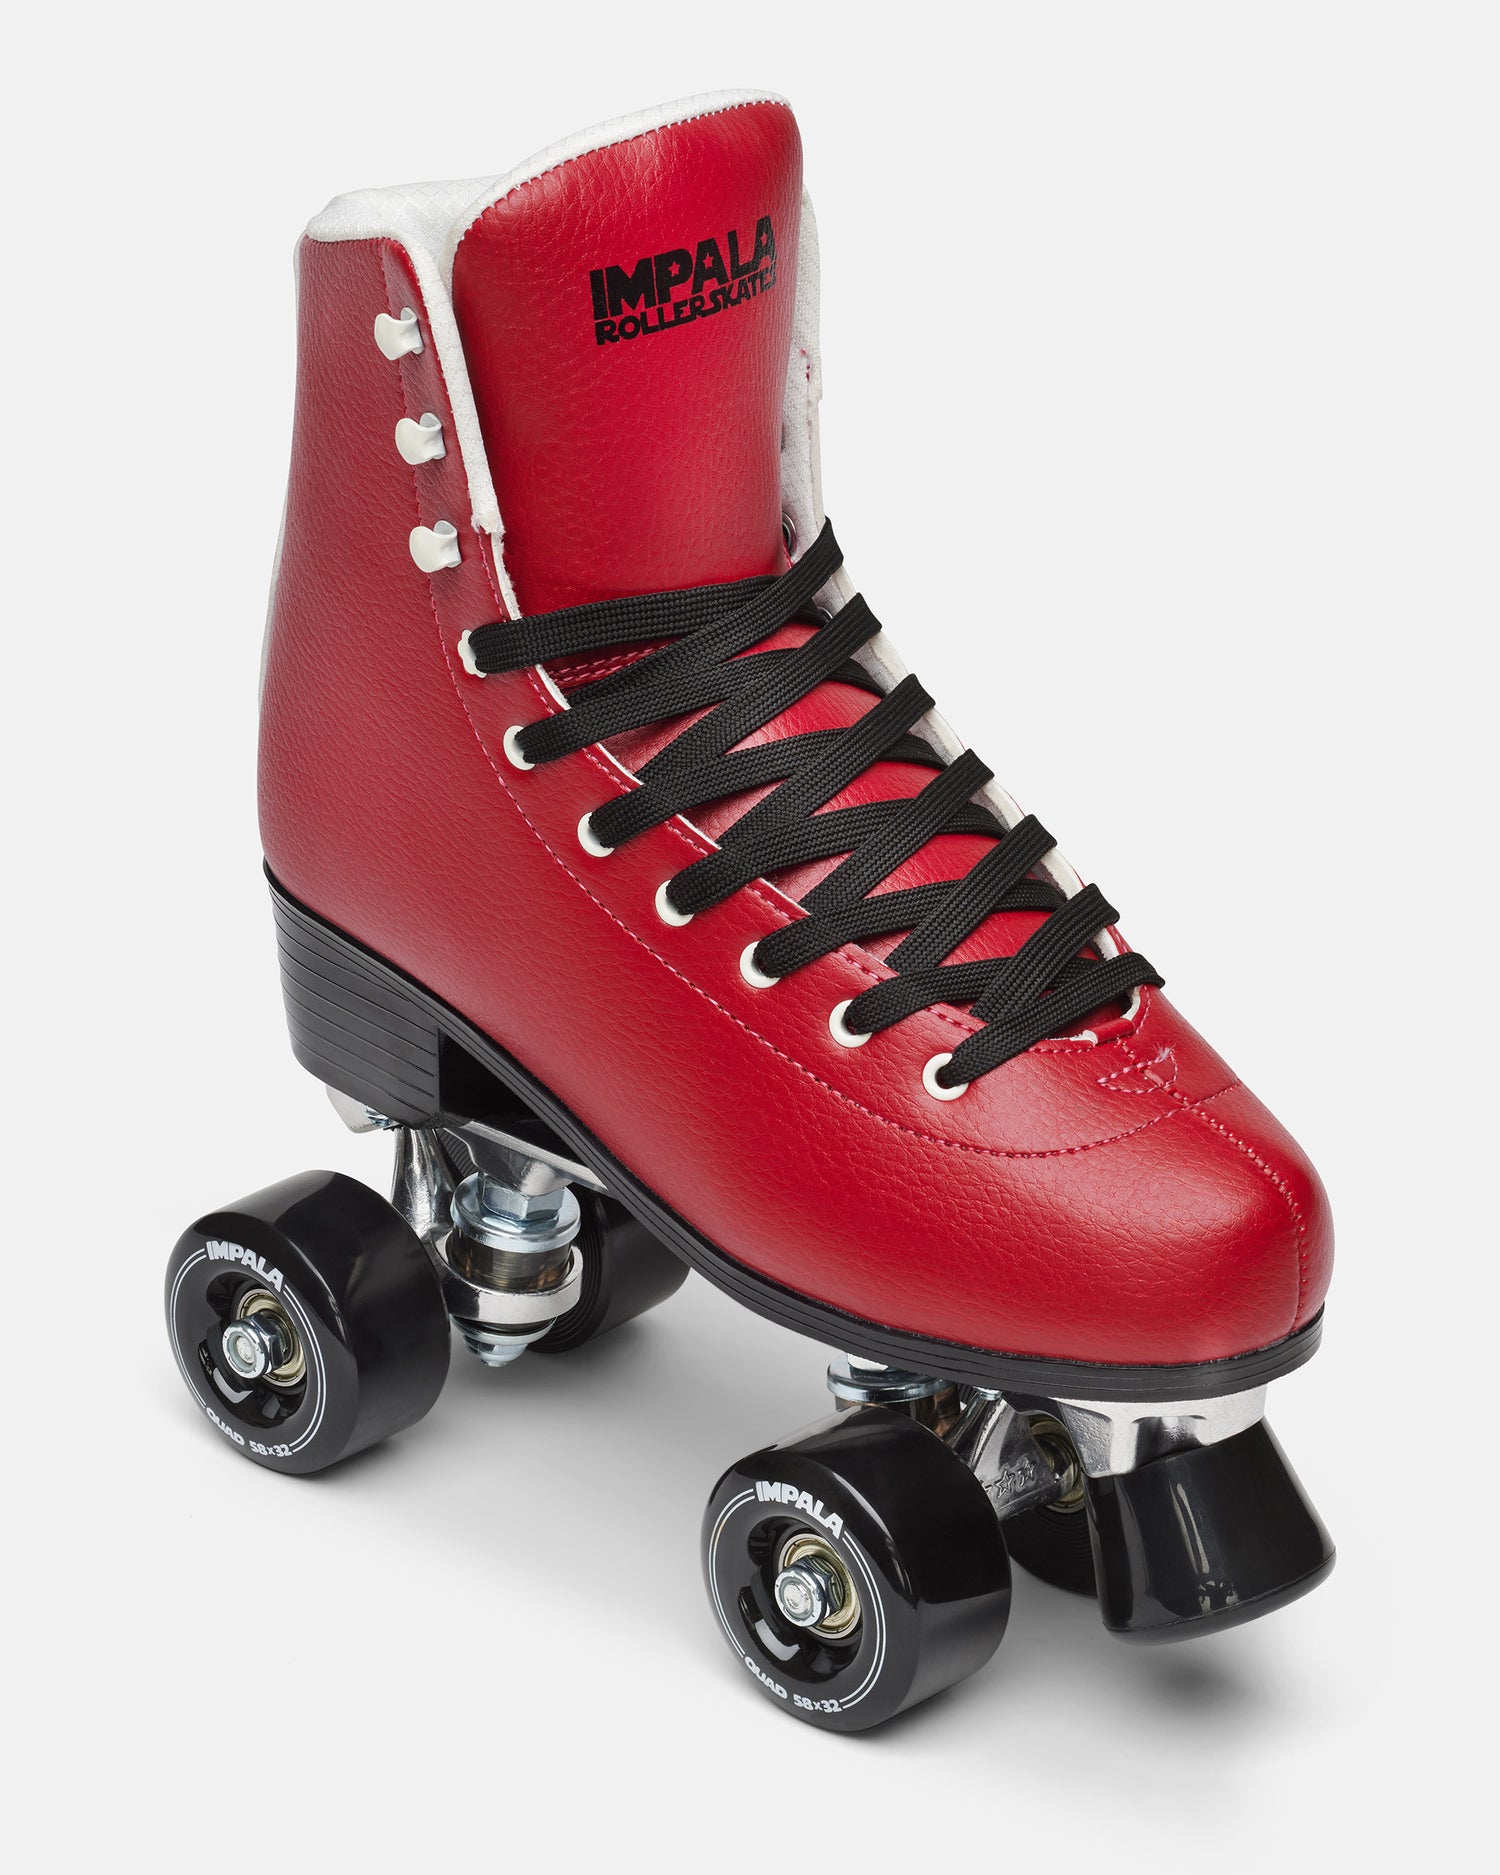 Front angled view of the Impala Quad Skate - Cherry